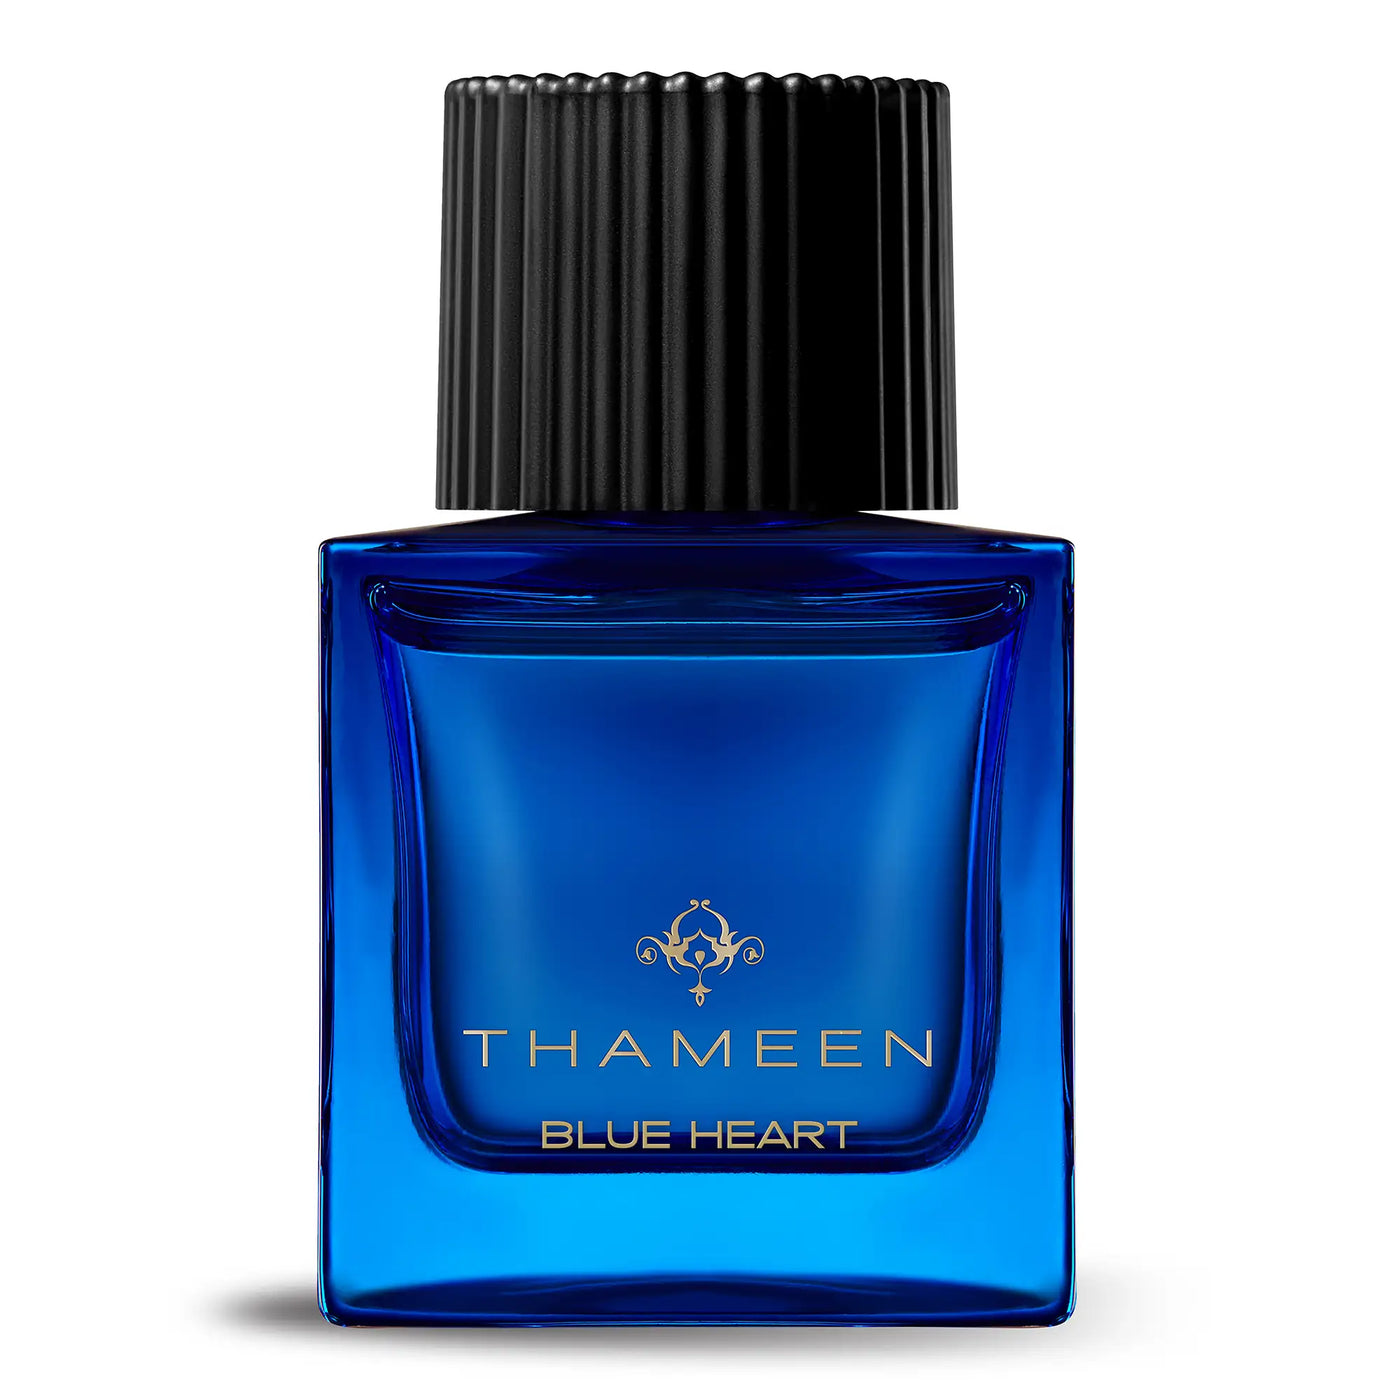 Thameen London Blue Heart - 50ml - Gharyal by Collectibles 